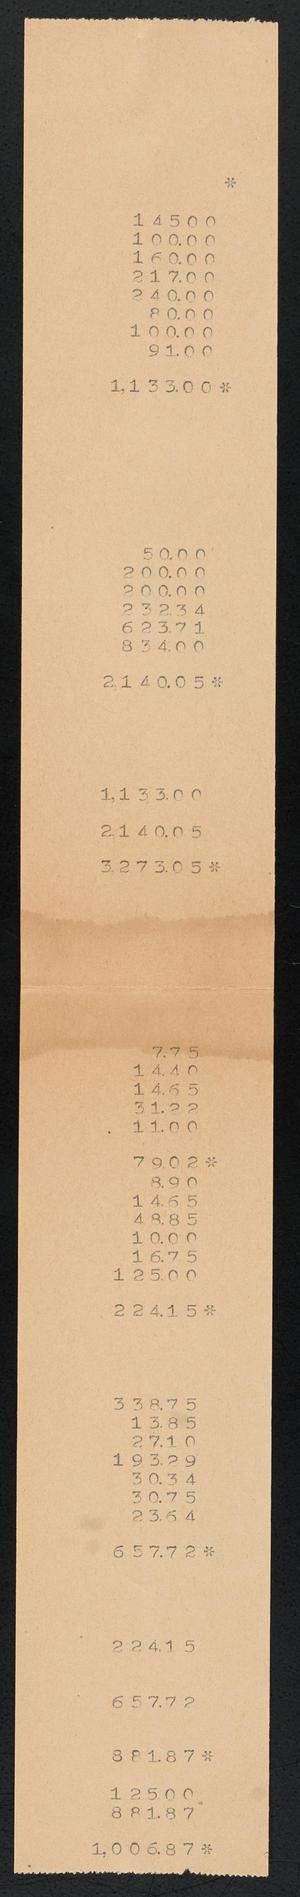 Primary view of object titled '[Adding Machine Tape]'.